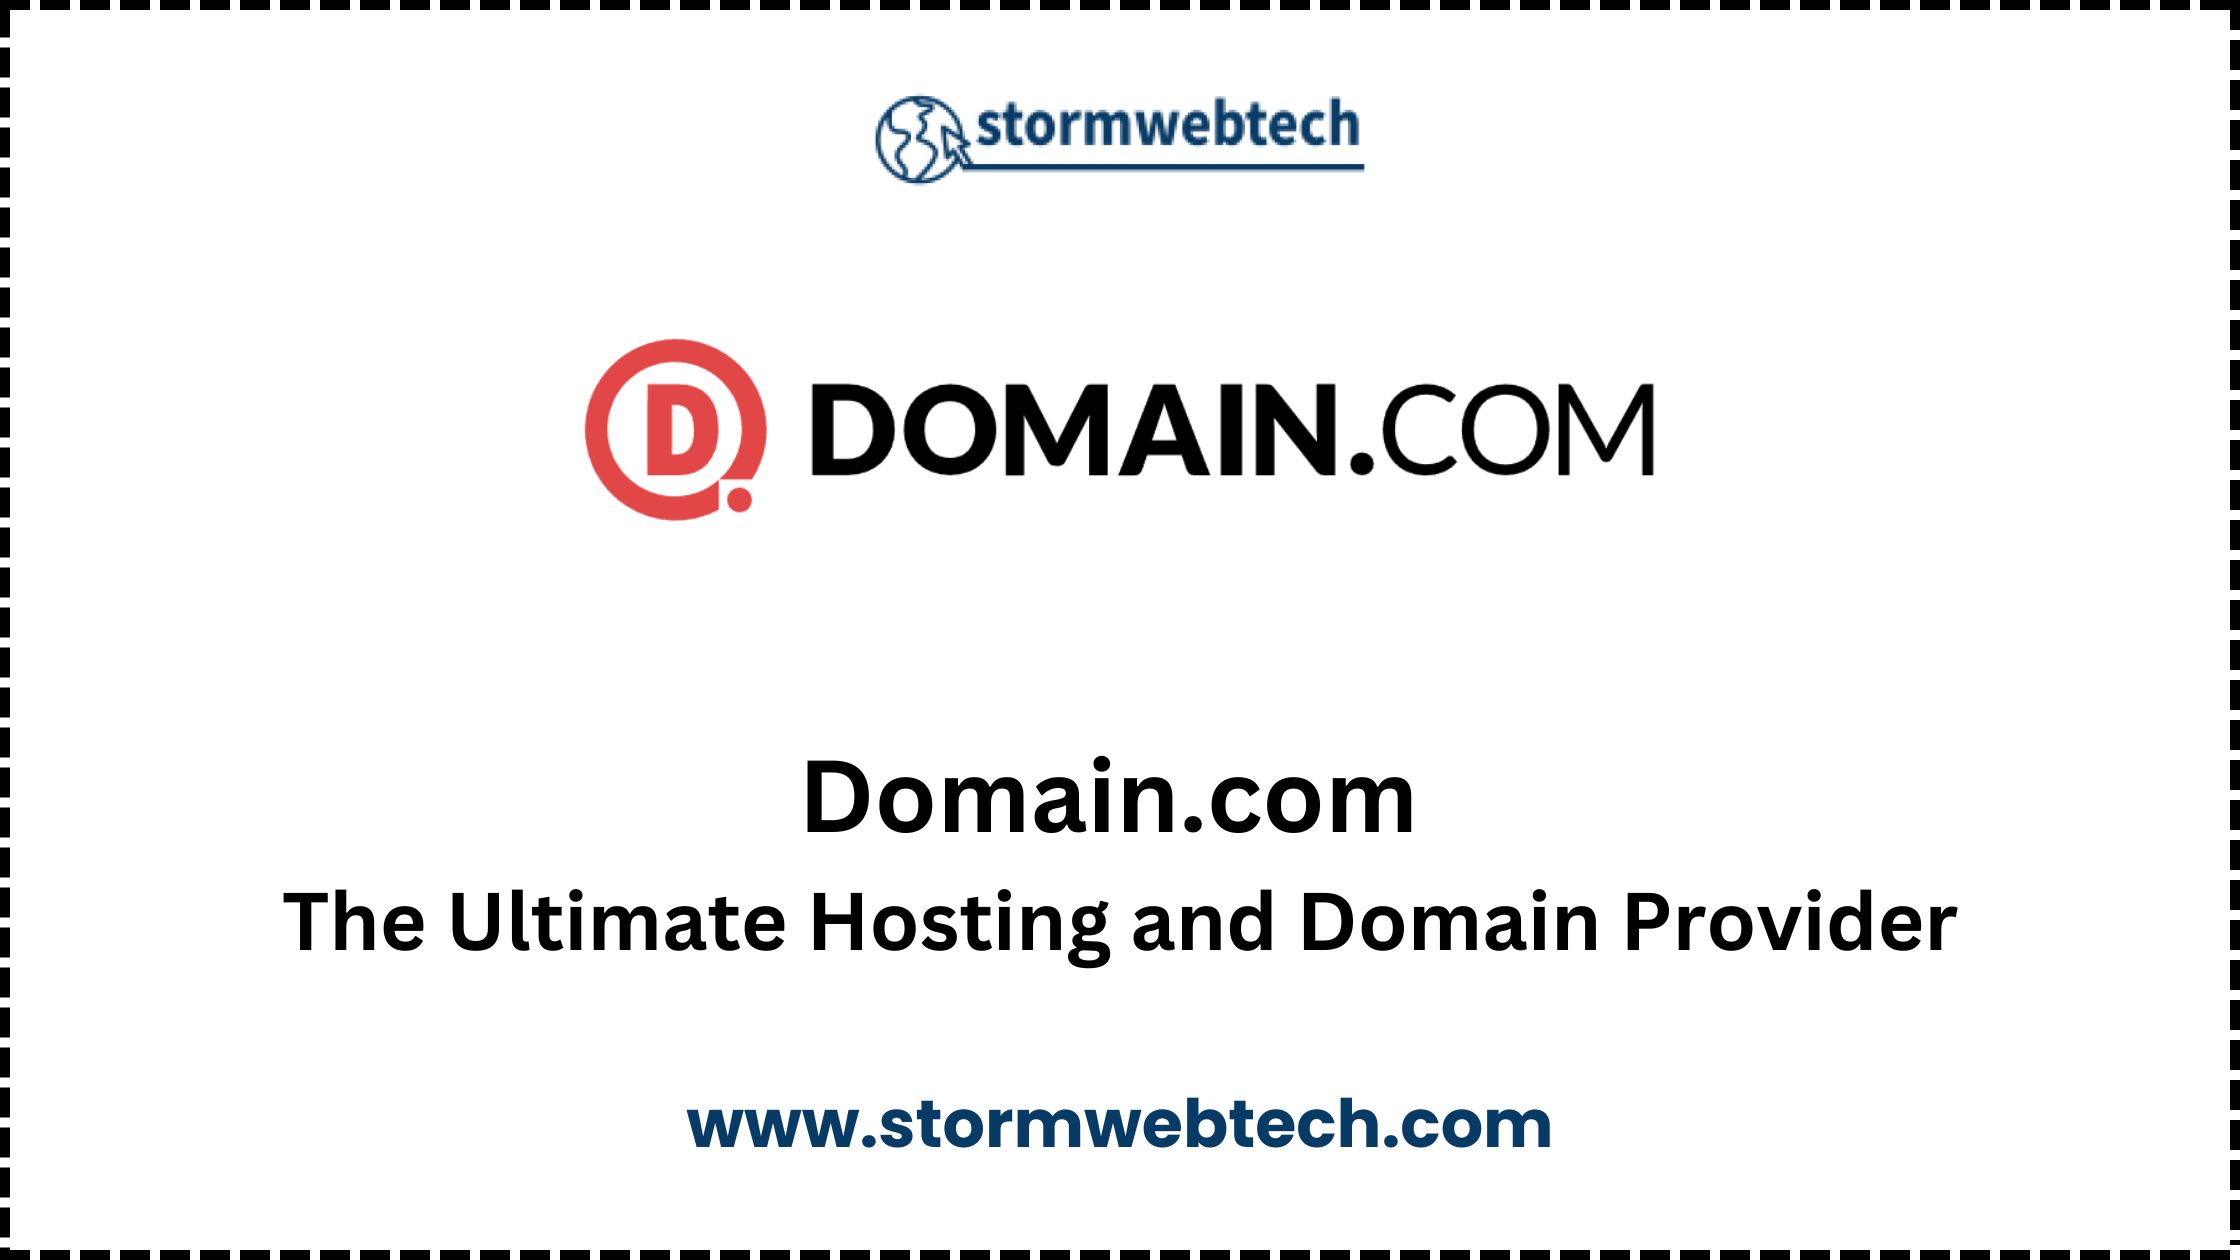 Domain.com : The Ultimate Hosting and Domain Provider, domain.com offer domain registration, website hosting, website builders, email hosting